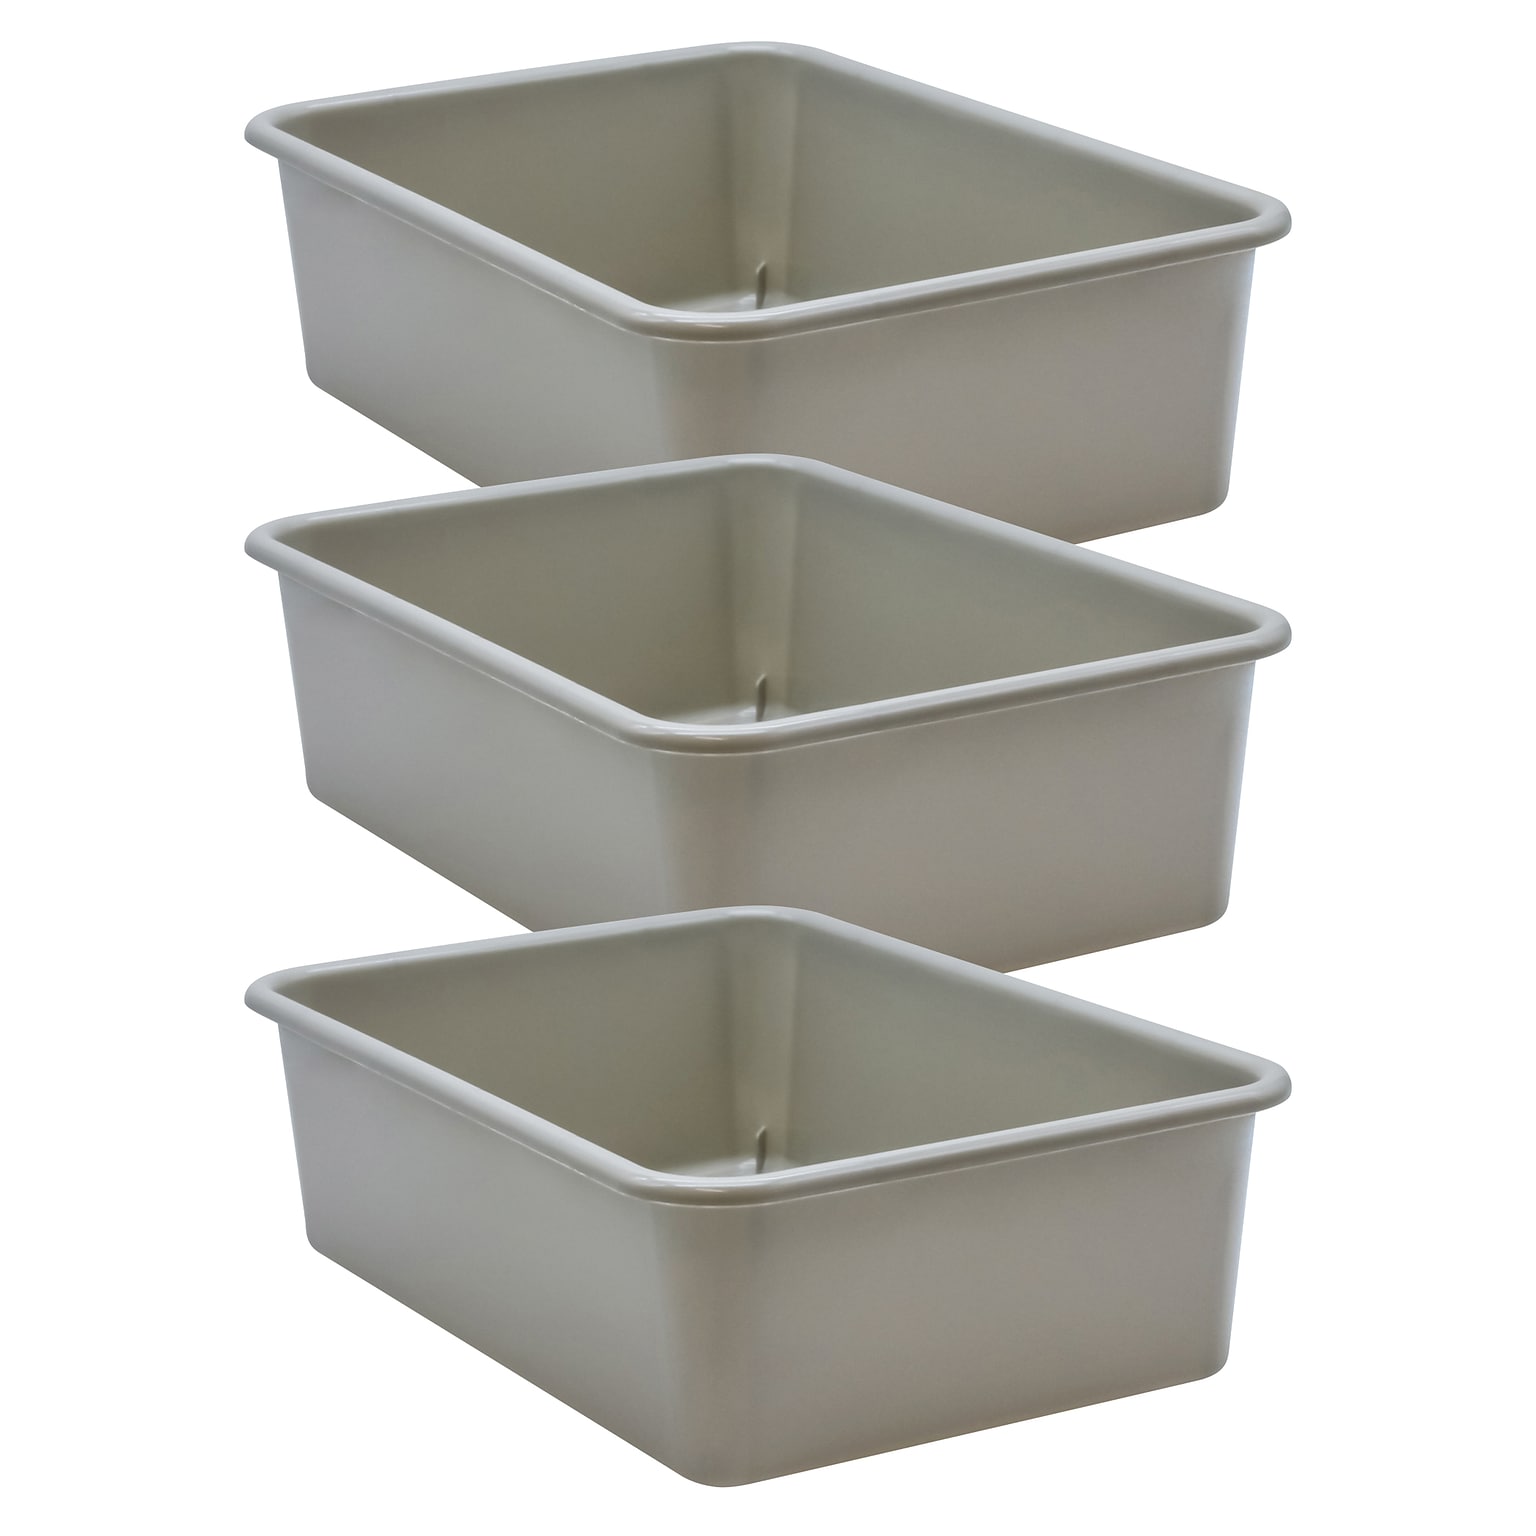 Teacher Created Resources® Plastic Storage Bin, Large, 16.25 x 11.5 x 5, Gray, Pack of 3 (TCR20413-3)